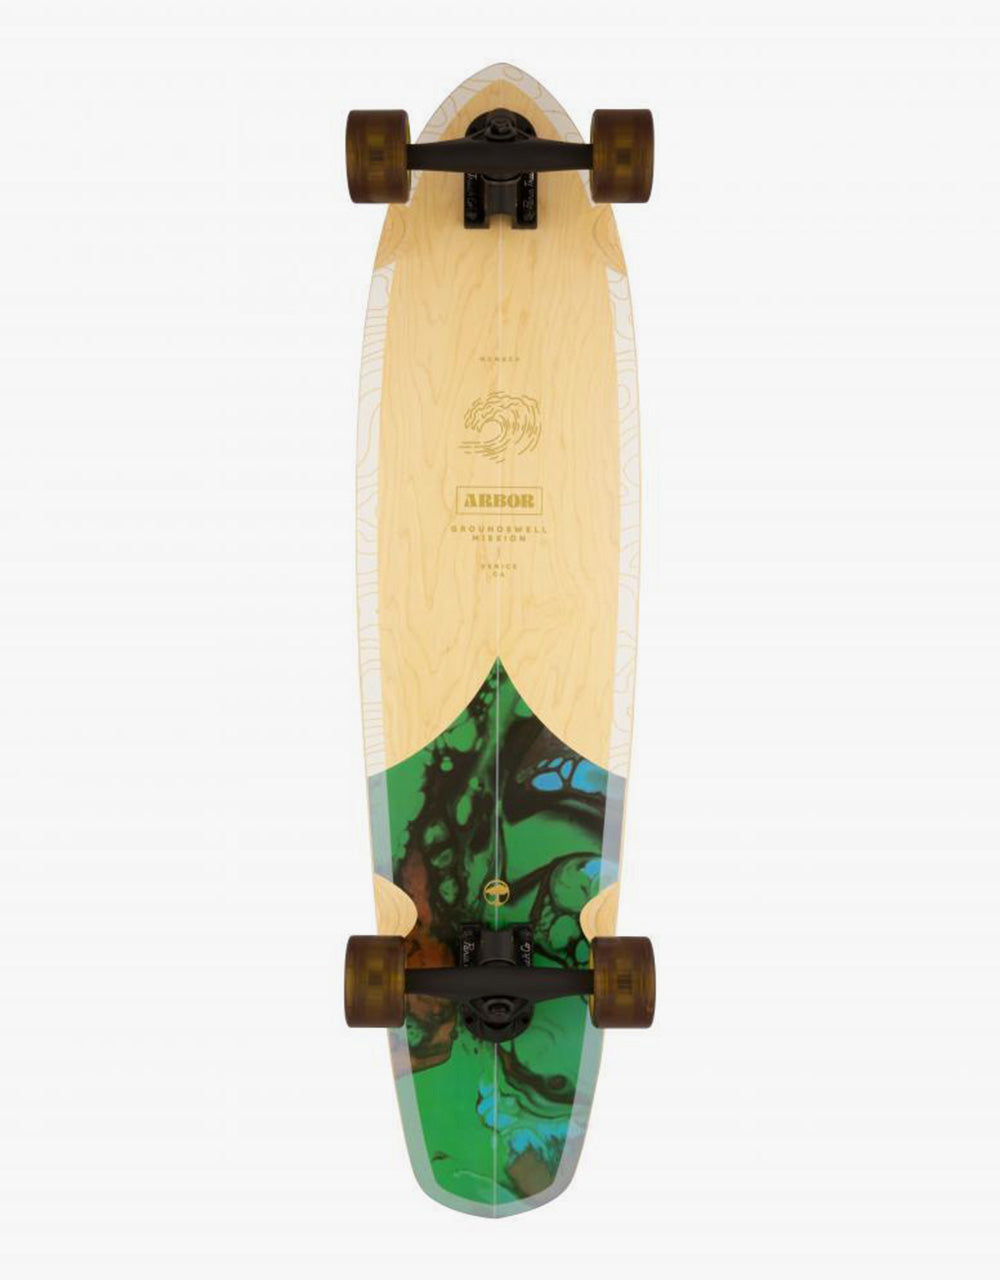 Arbor Groundswell Mission Longboard - 35" x 8.625"